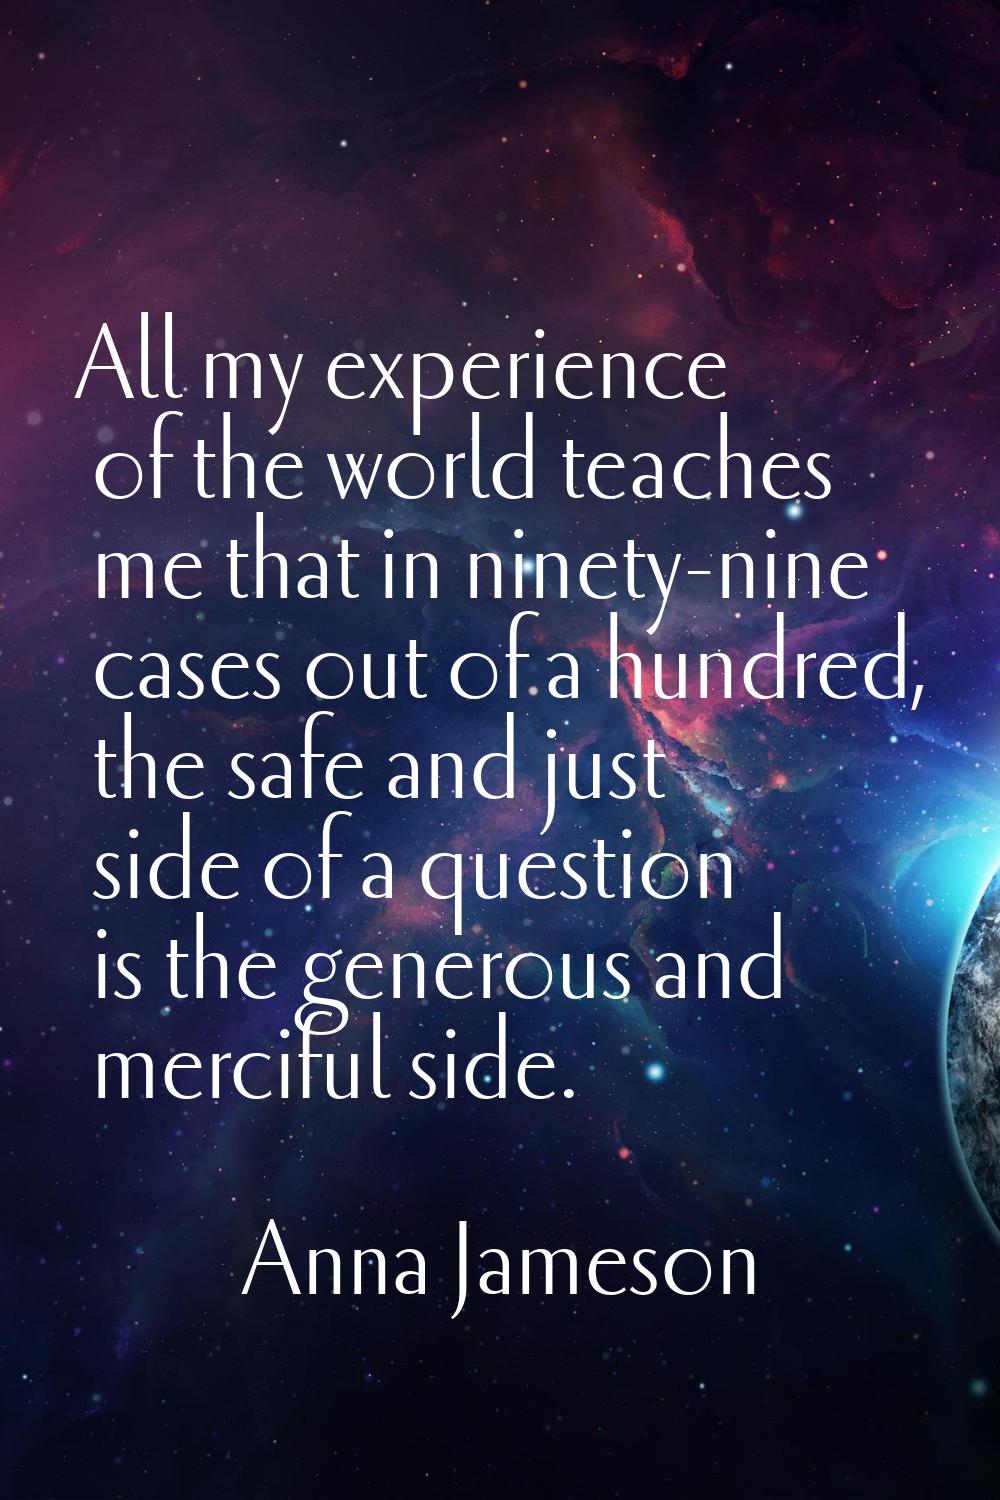 All my experience of the world teaches me that in ninety-nine cases out of a hundred, the safe and 